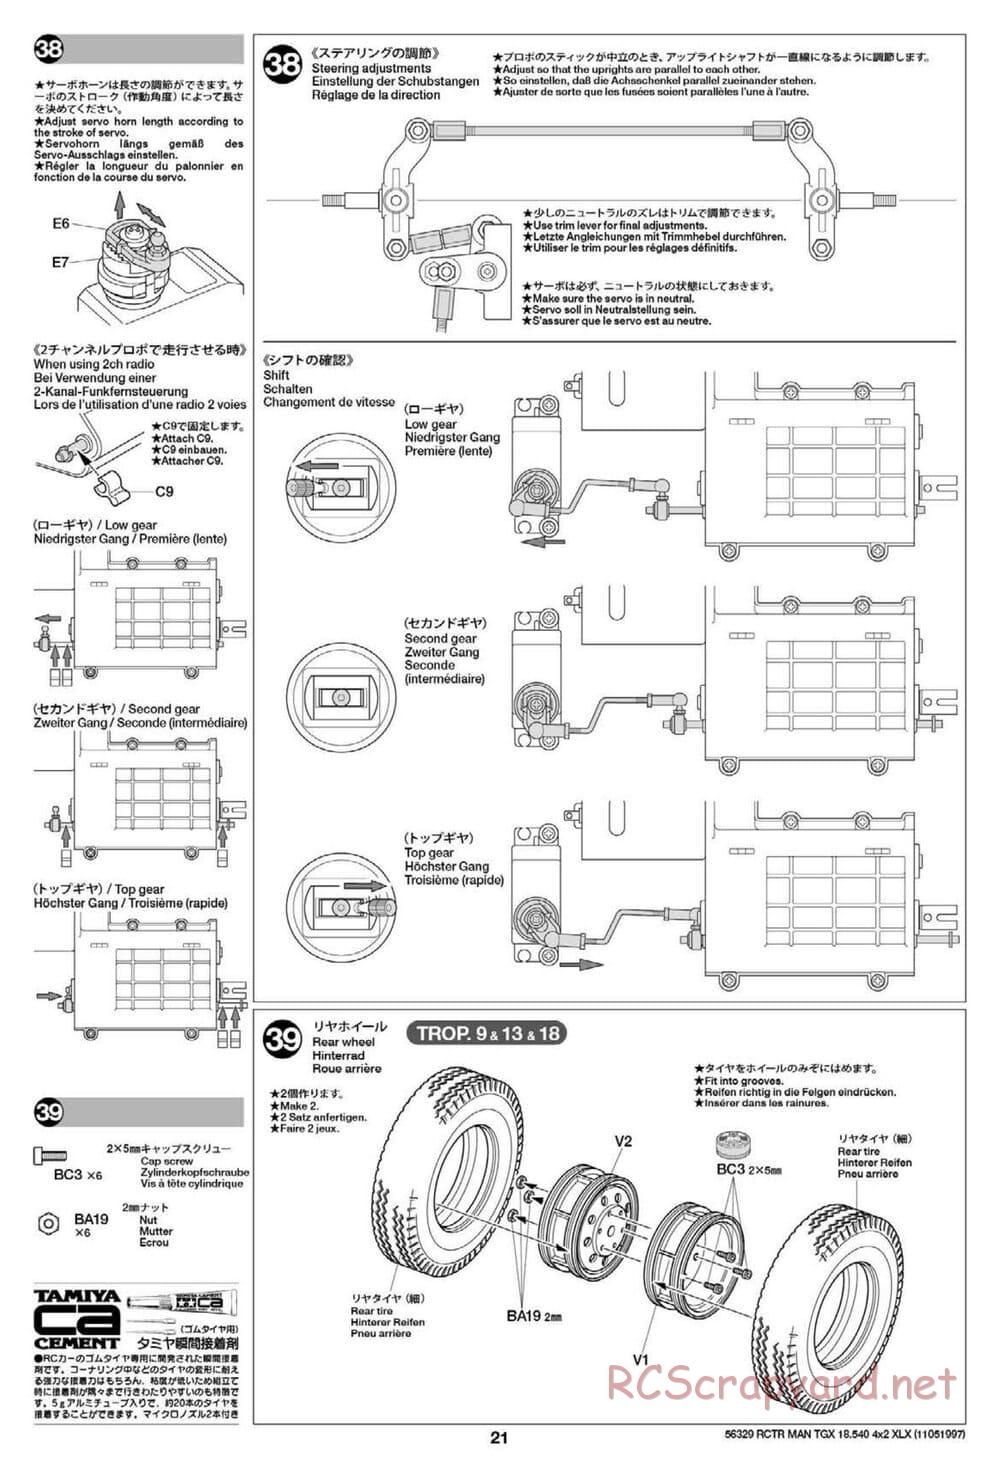 Tamiya - Mercedes-Benz Actros 1851 Gigaspace Tractor Truck Chassis - Manual - Page 21